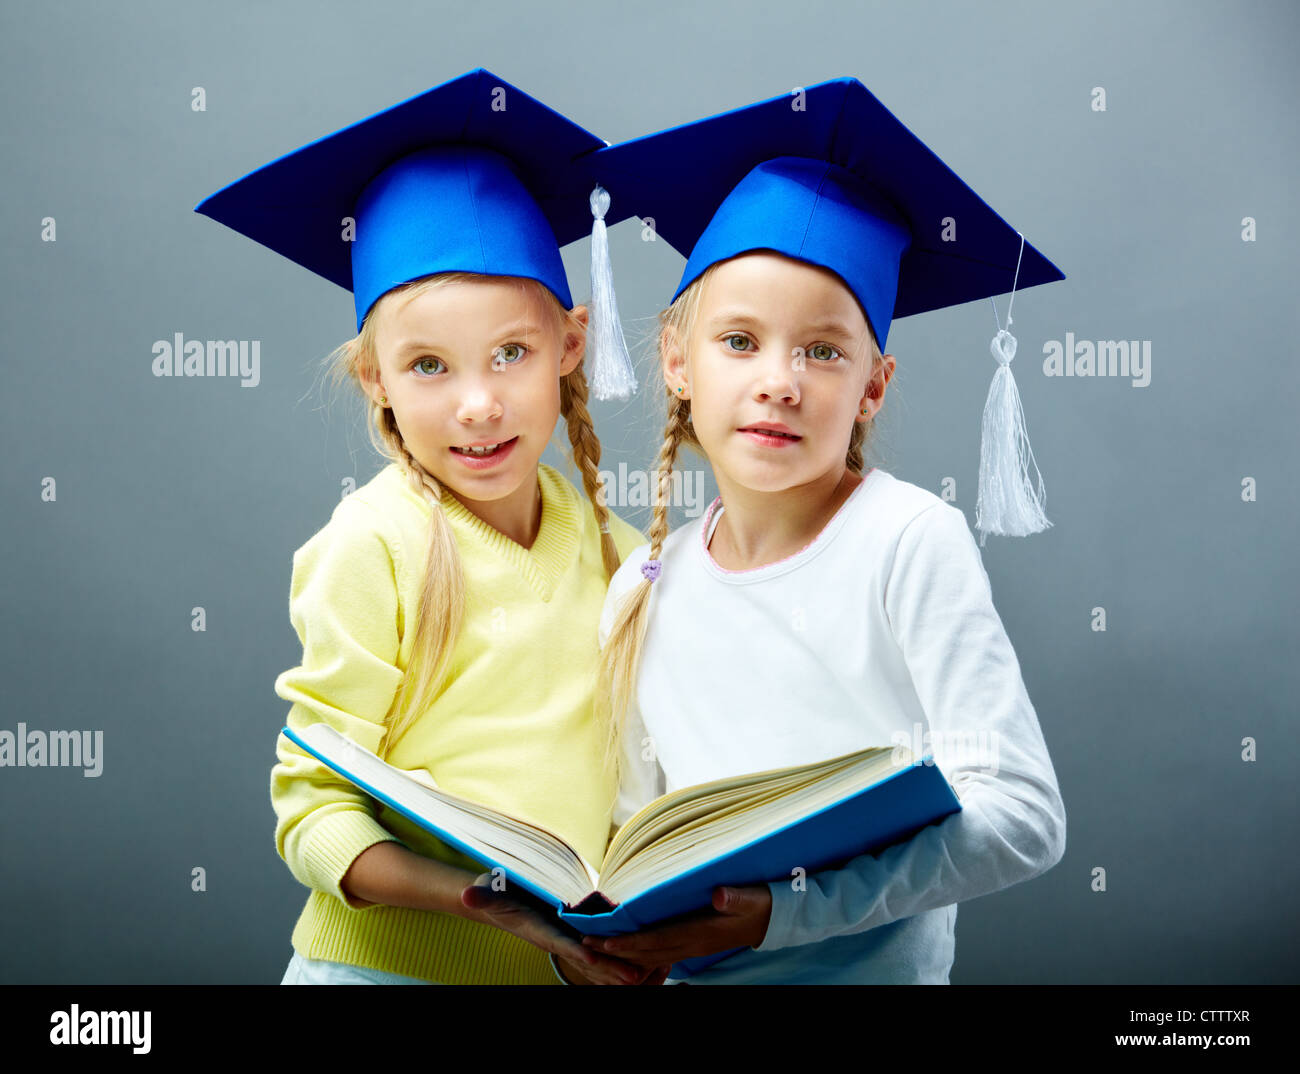 Portrait of lovely twin girls in hats with tassels holding open book Stock Photo